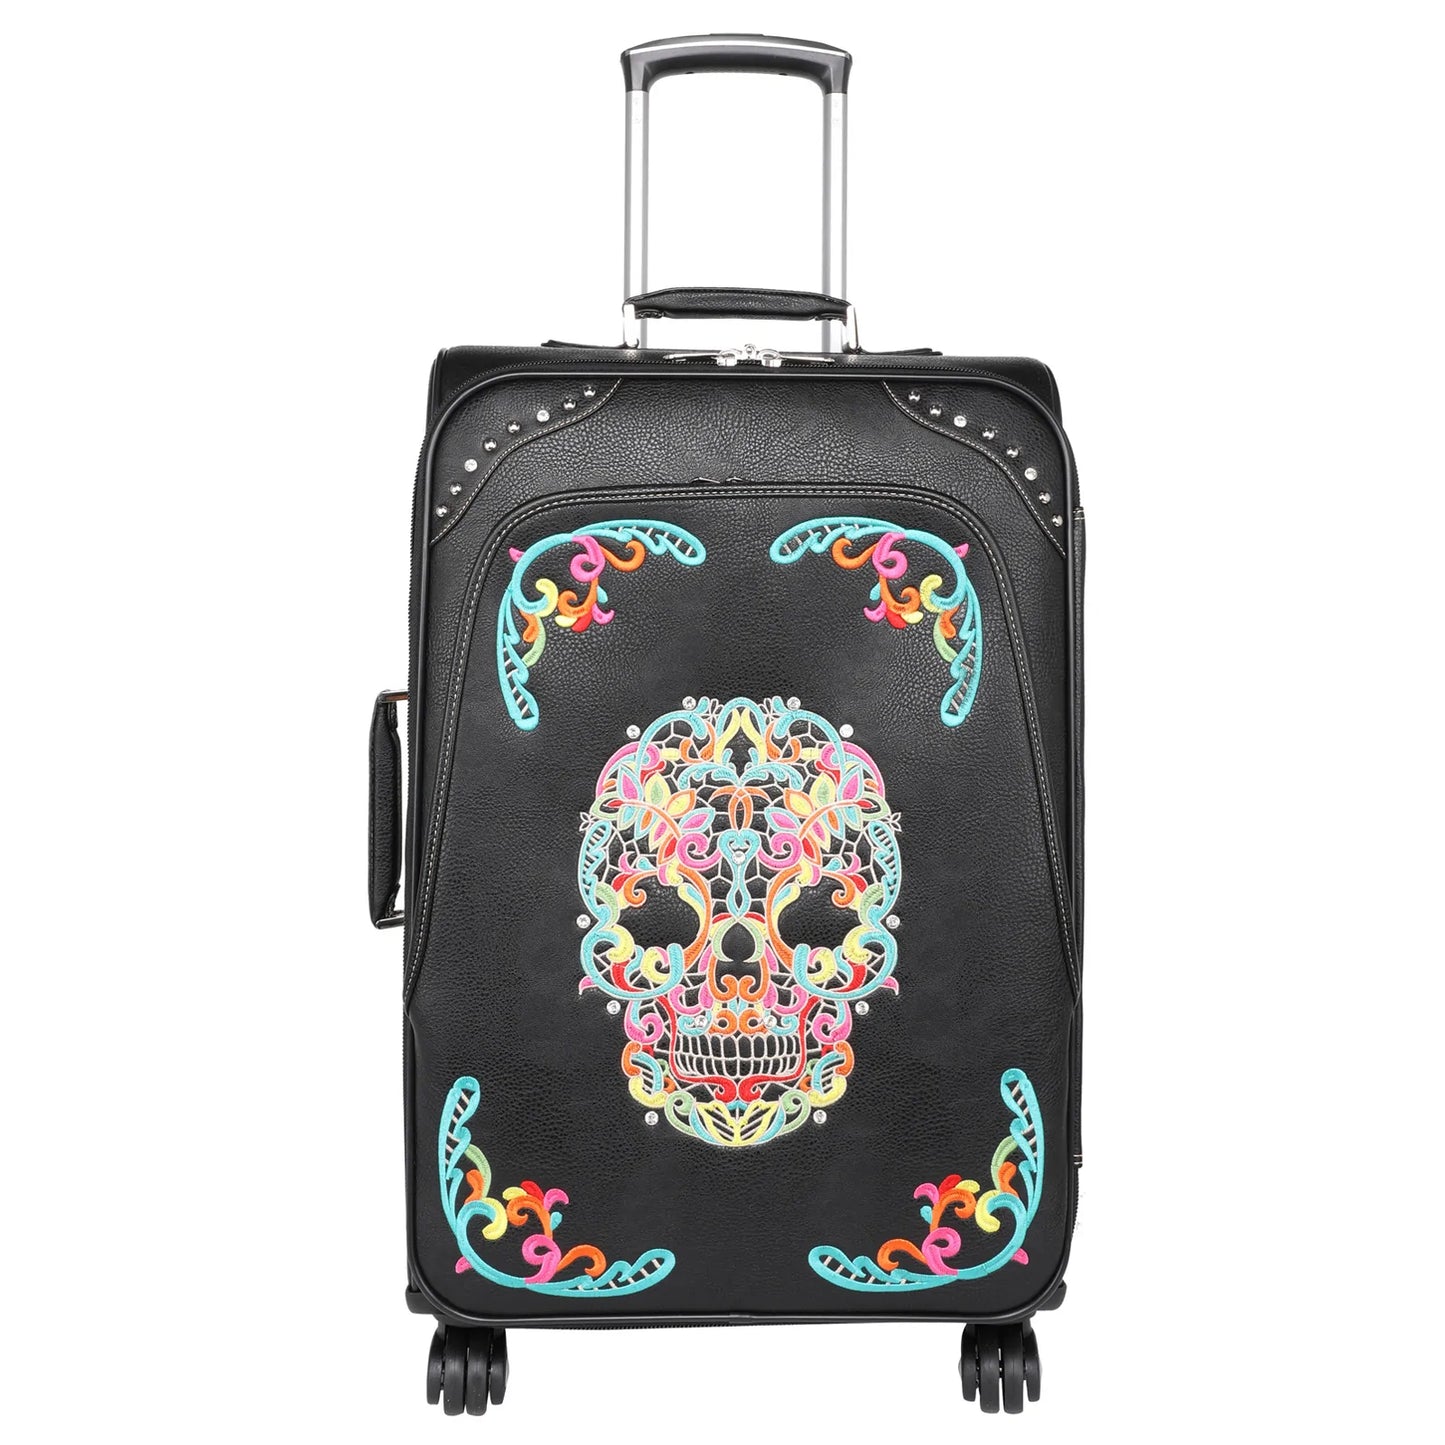 Montana West Sugar Skull Collection 3 PC Luggage Set – Dazzled